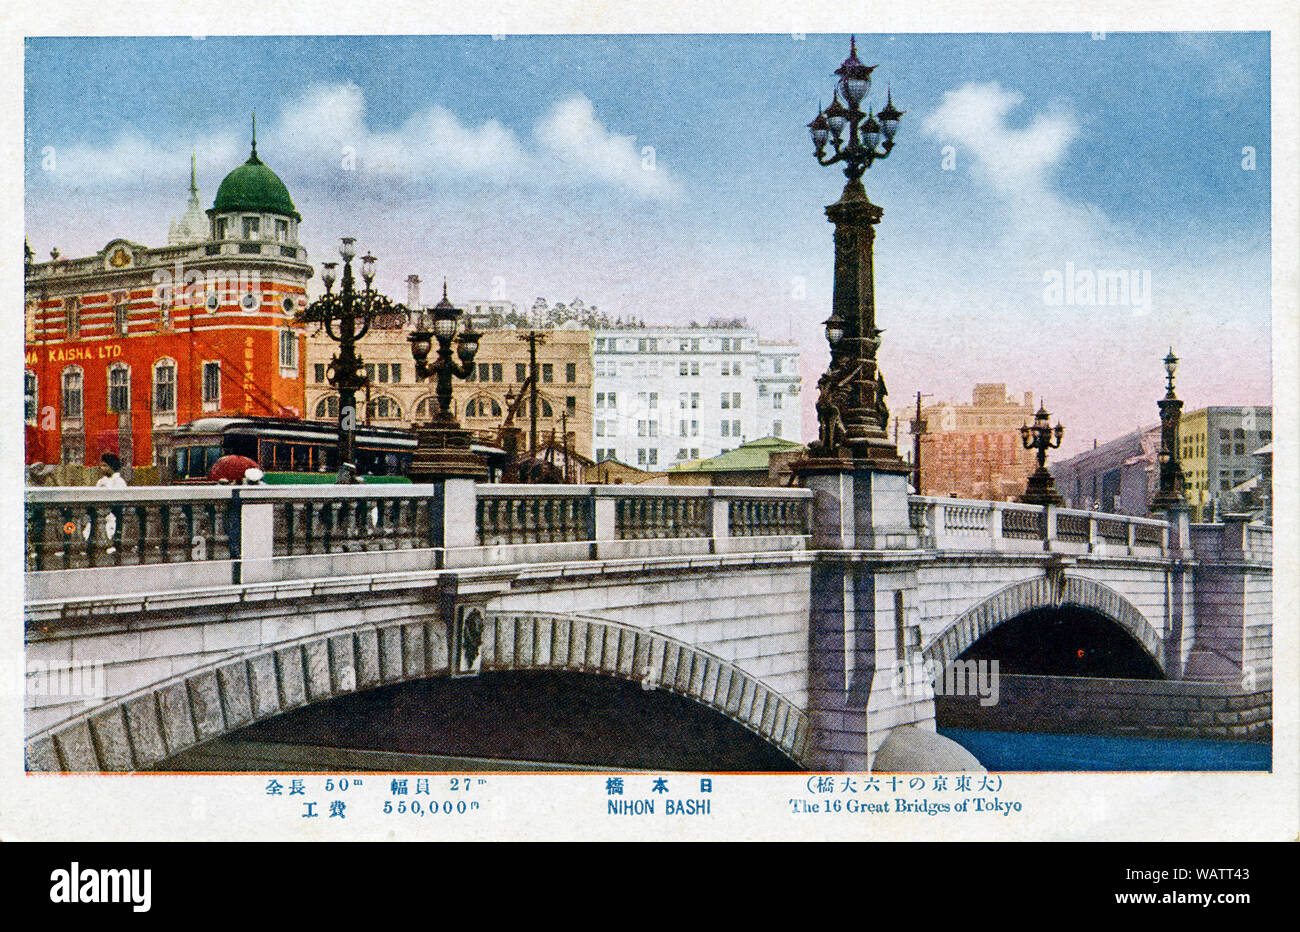 [ 1920s Japan - Nihonbashi Bridge, Tokyo ] —   Nihonbashi in Tokyo. During the Edo Period (1600-1867), the bridge was the starting point of the famous Tokaido and Japan's other 4 post roads. The stone bridge with bronze lions and wrought-iron gas lamps replaced the wooden one in 1911.  The red building is the Imperial Hemp Exchange Building; the white building in the middle the Mitsukoshi Department Store.  20th century vintage postcard. Stock Photo